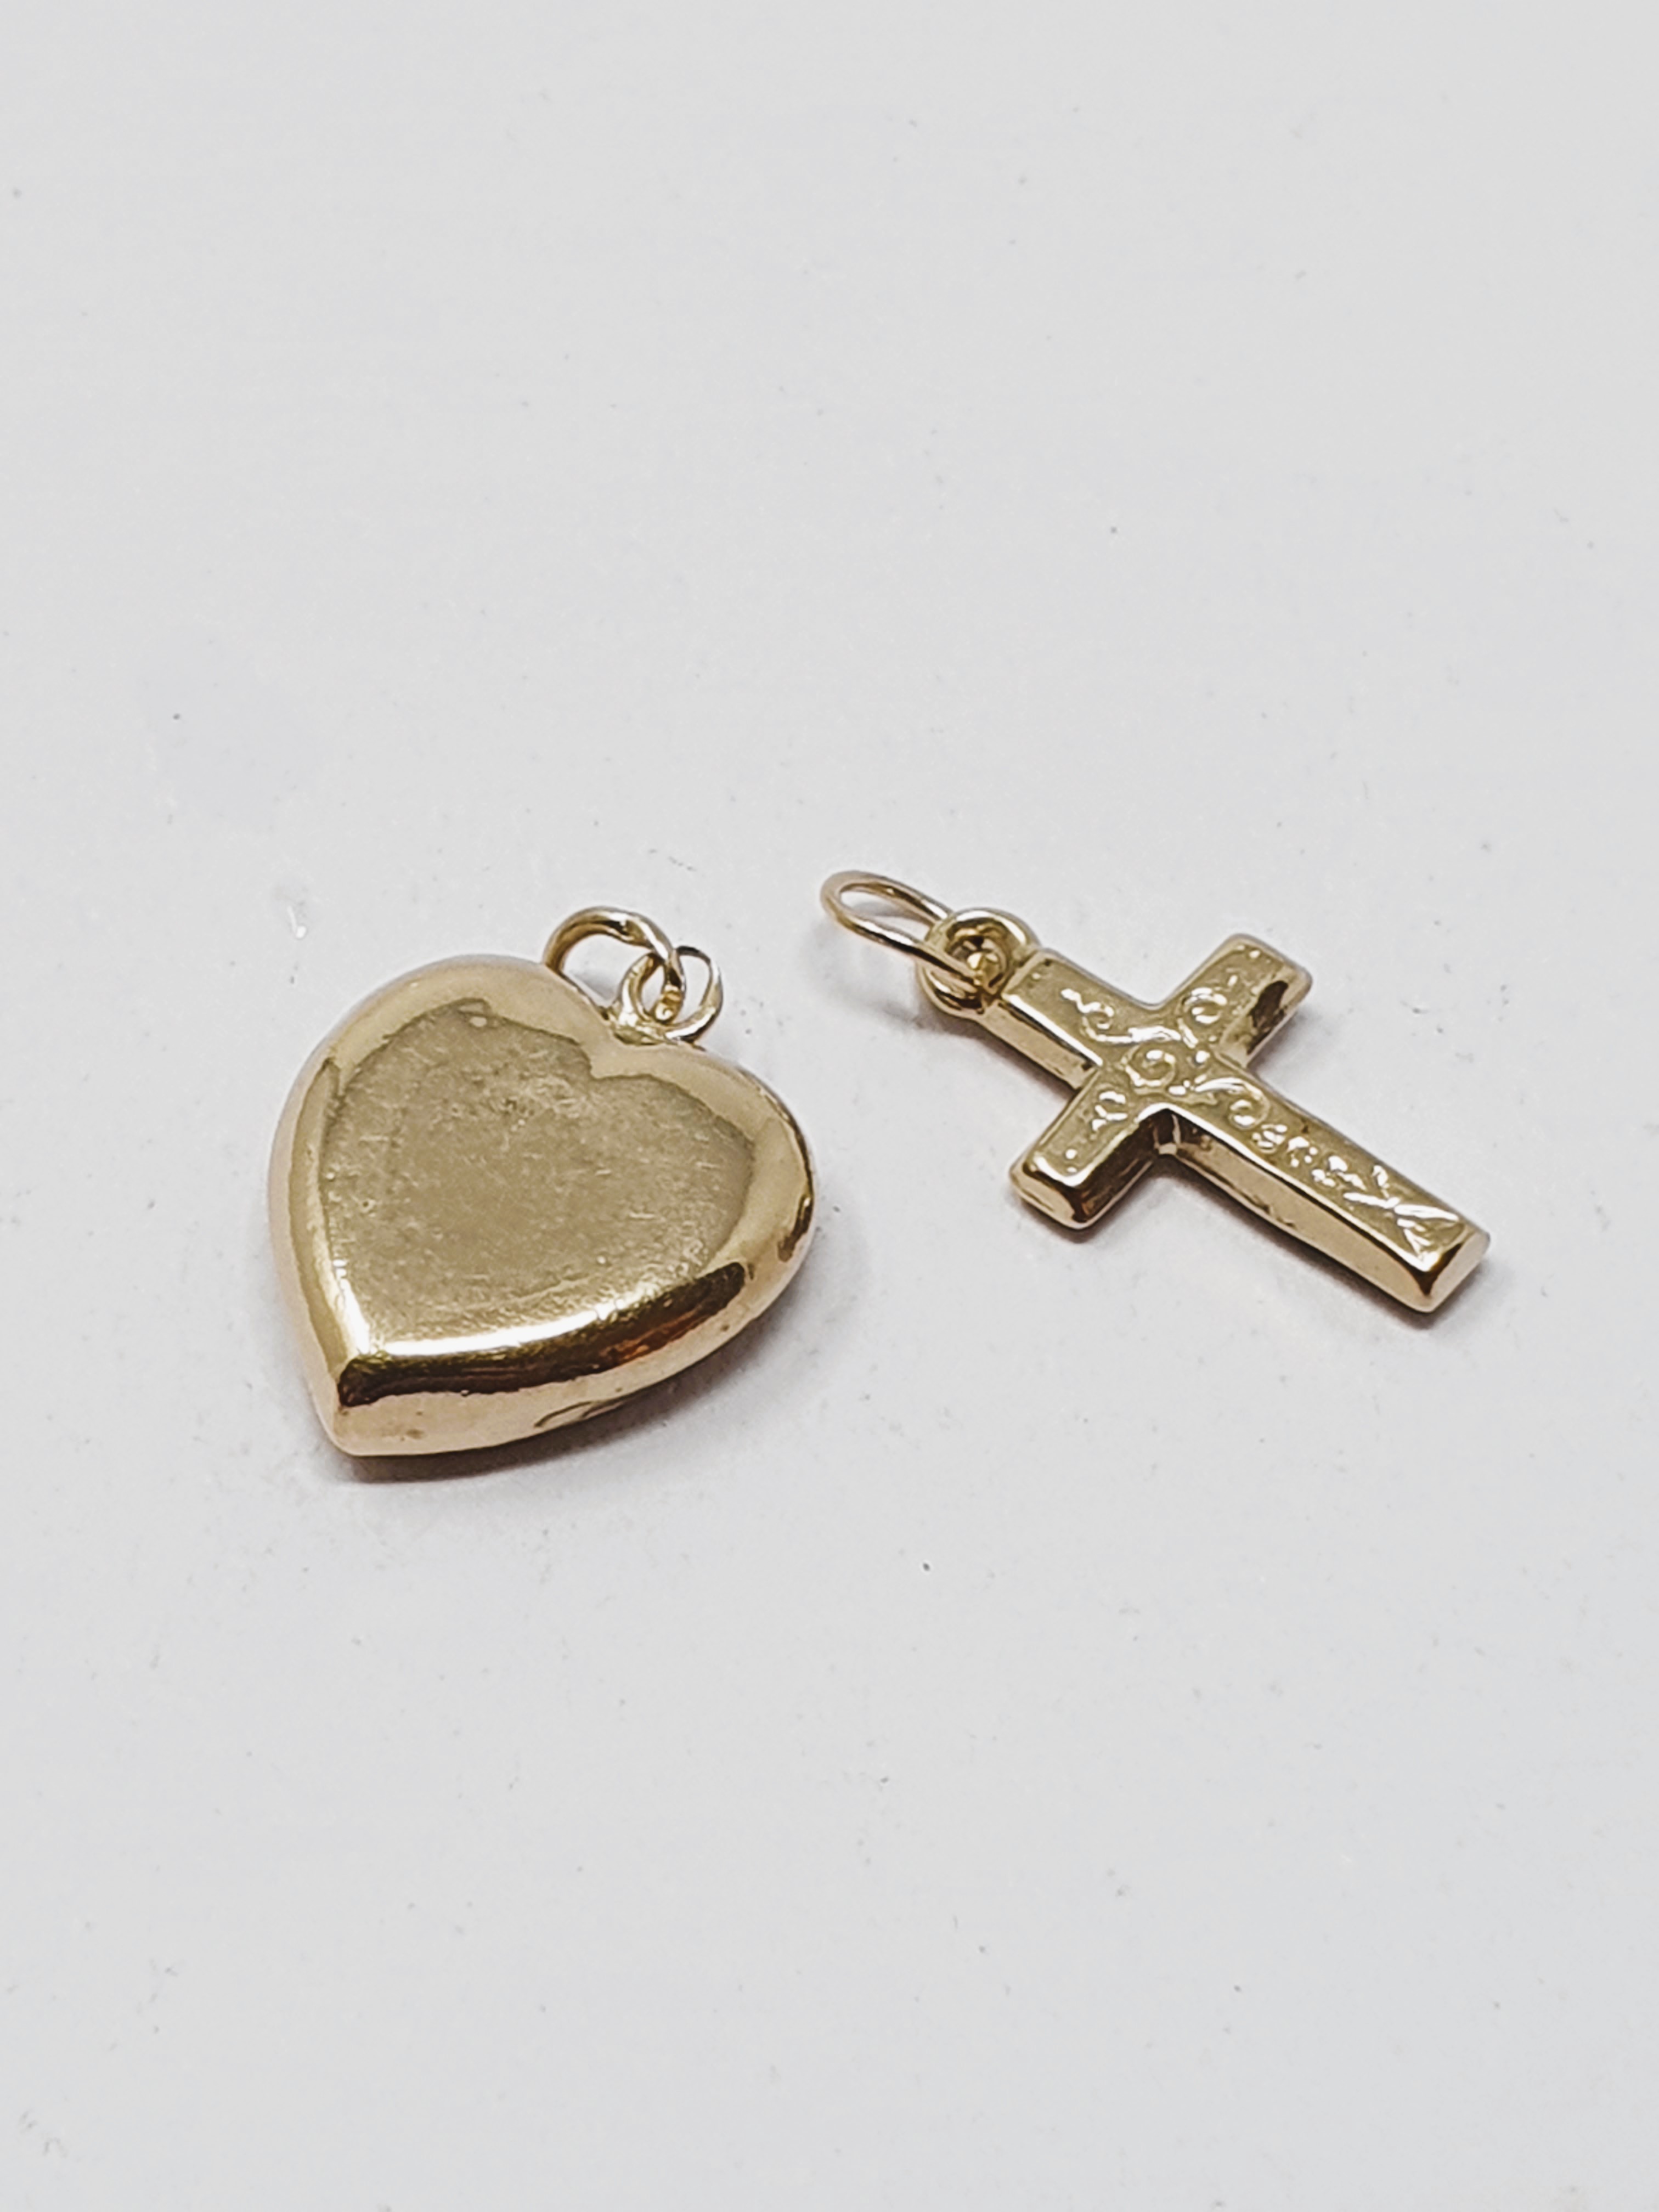 9ct gold vintage heart charm and a vintage 9ct gold cross charm, total gross weight 1.